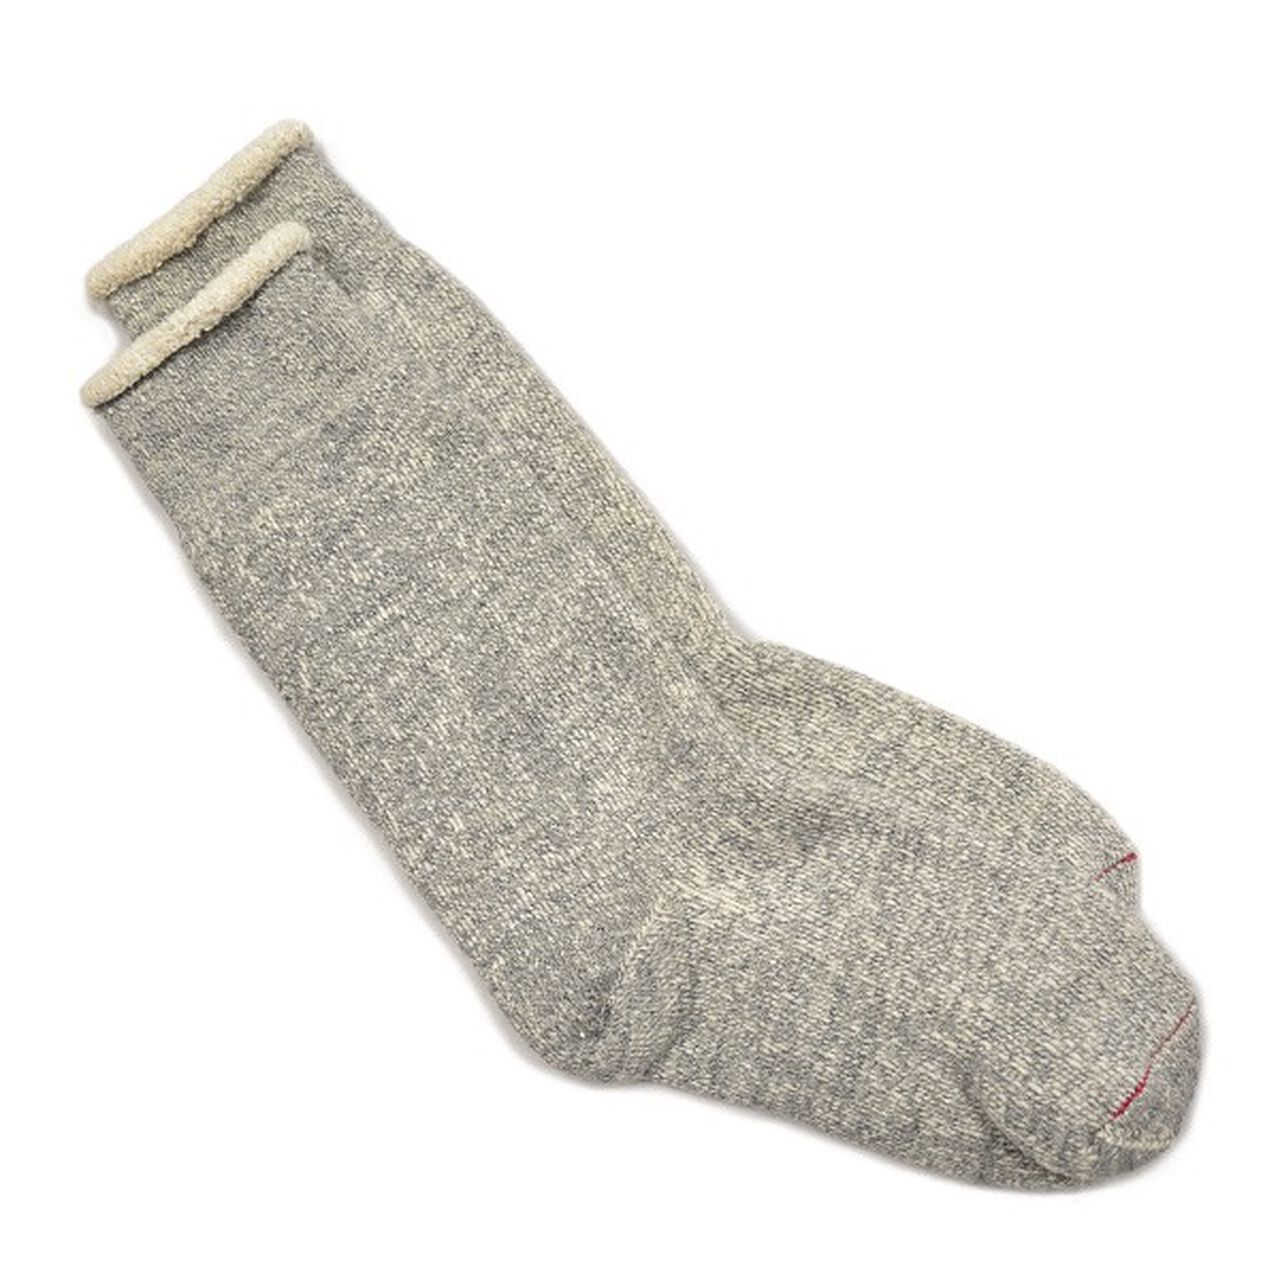 R1001 Double Face Socks,MidGrey, large image number 0